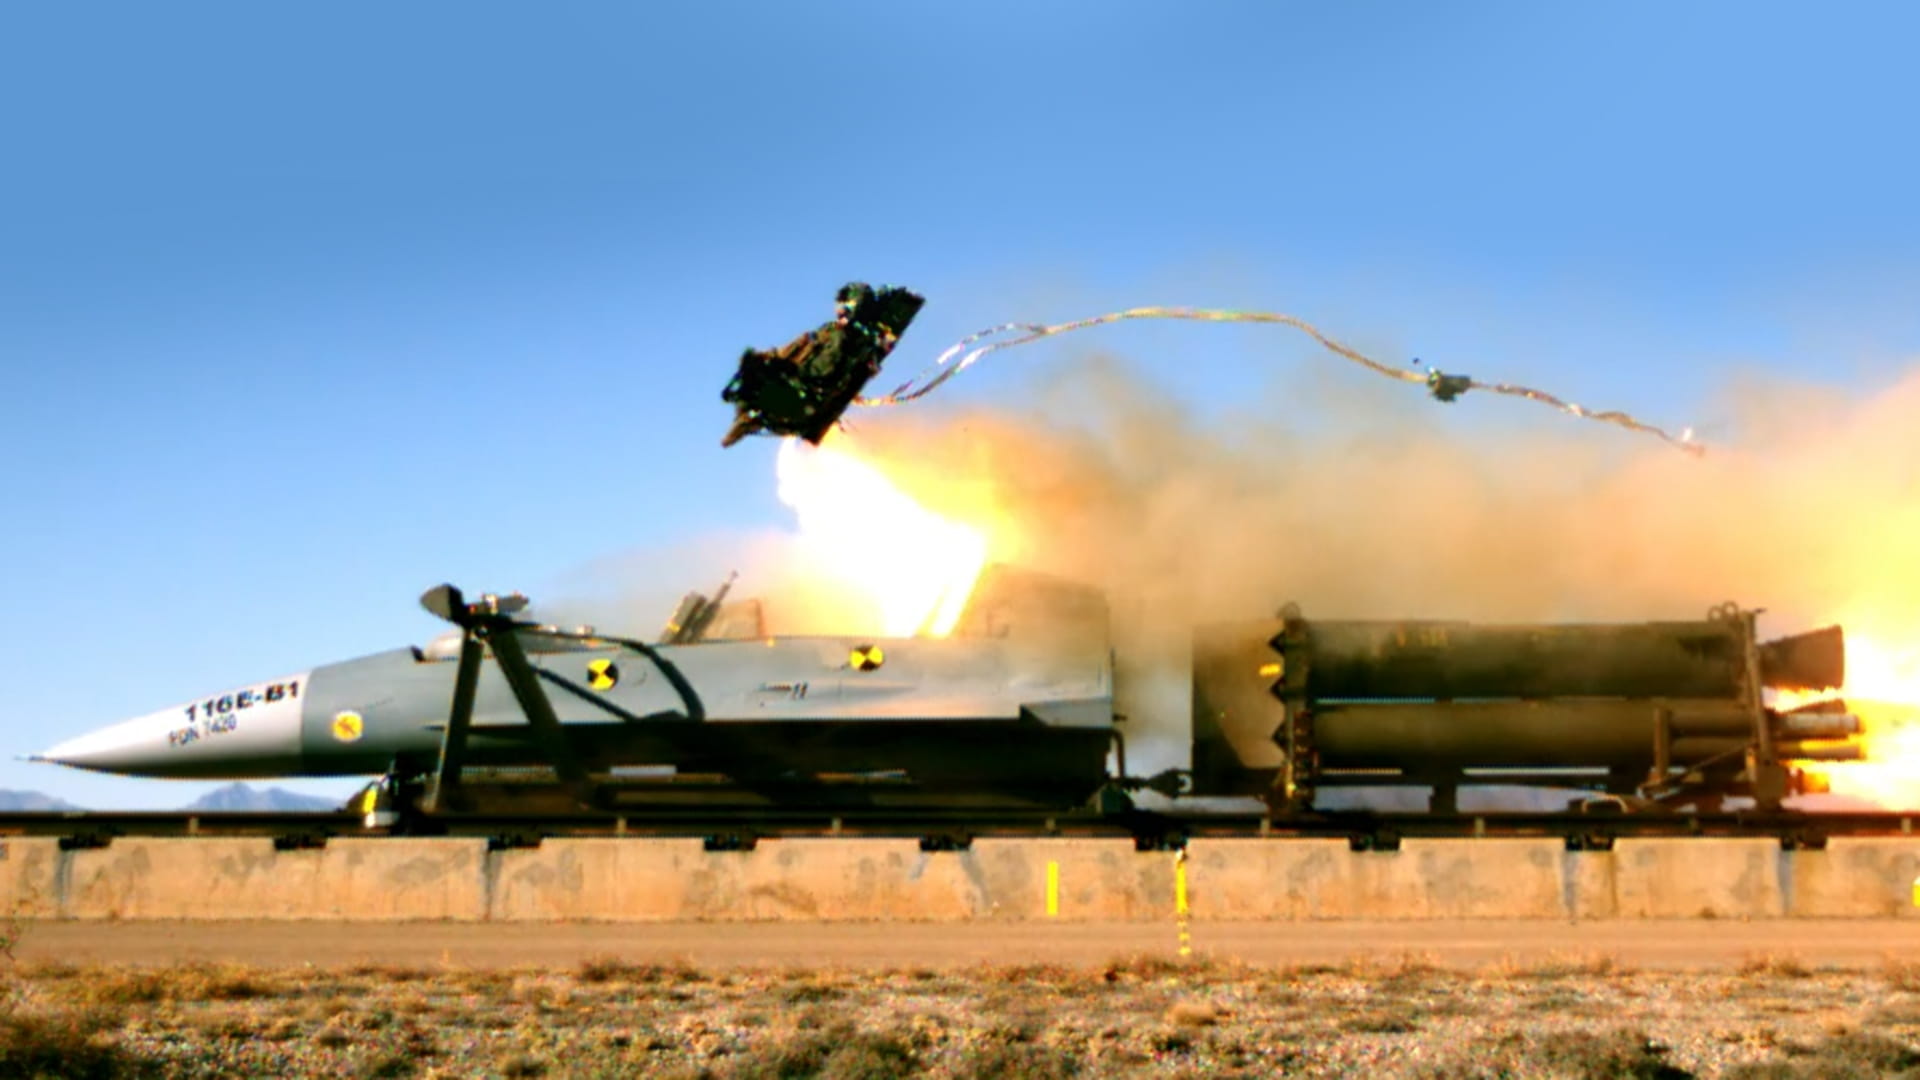 Ejection seat deploying from aircraft